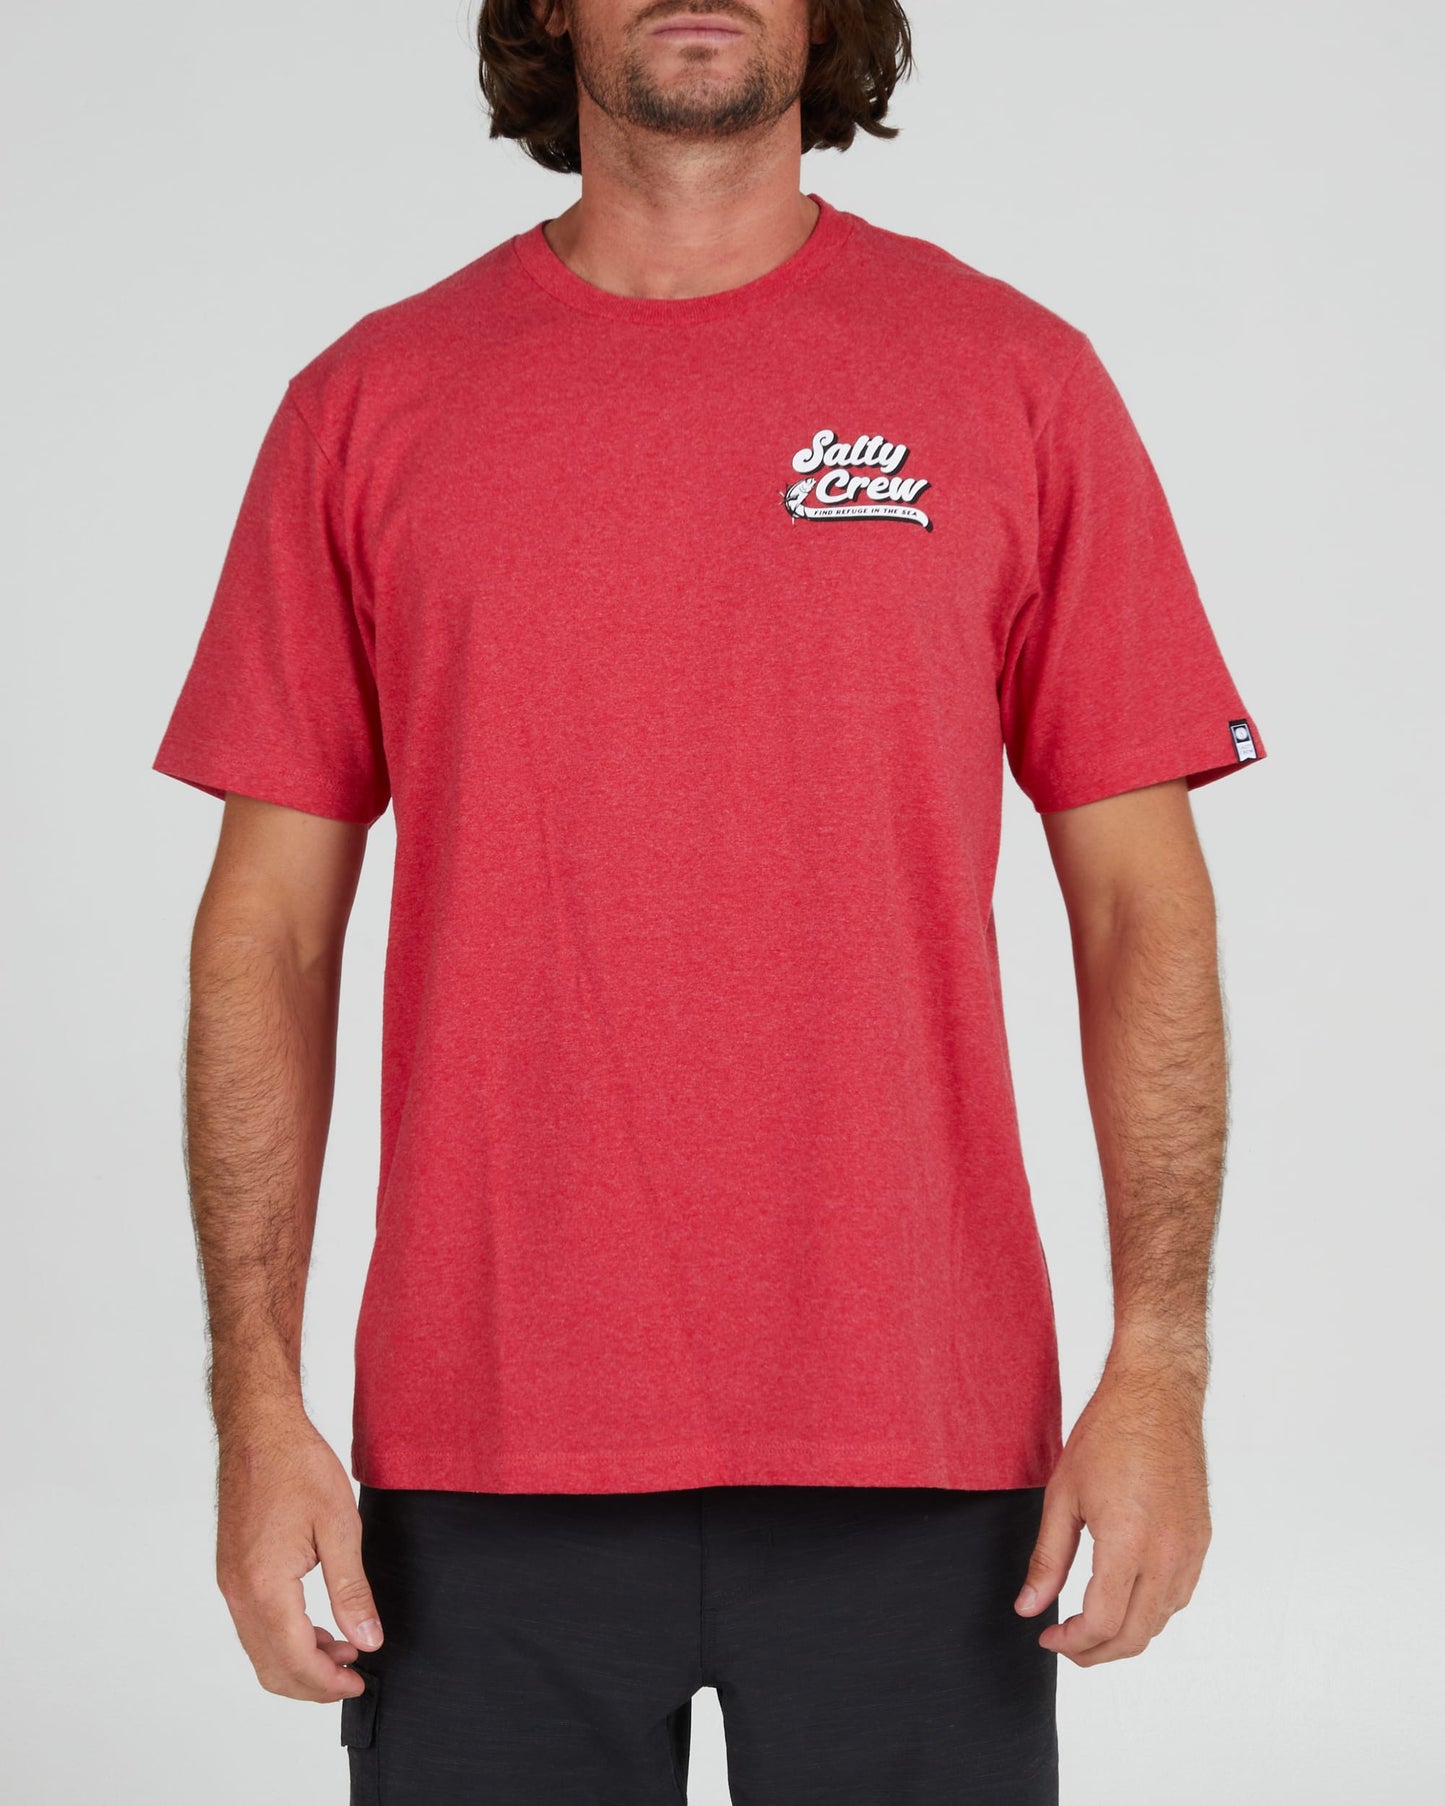 Salty crew T-SHIRTS S/S SWIFT WATER STANDARD S/S TEE - Red Heather in Red Heather